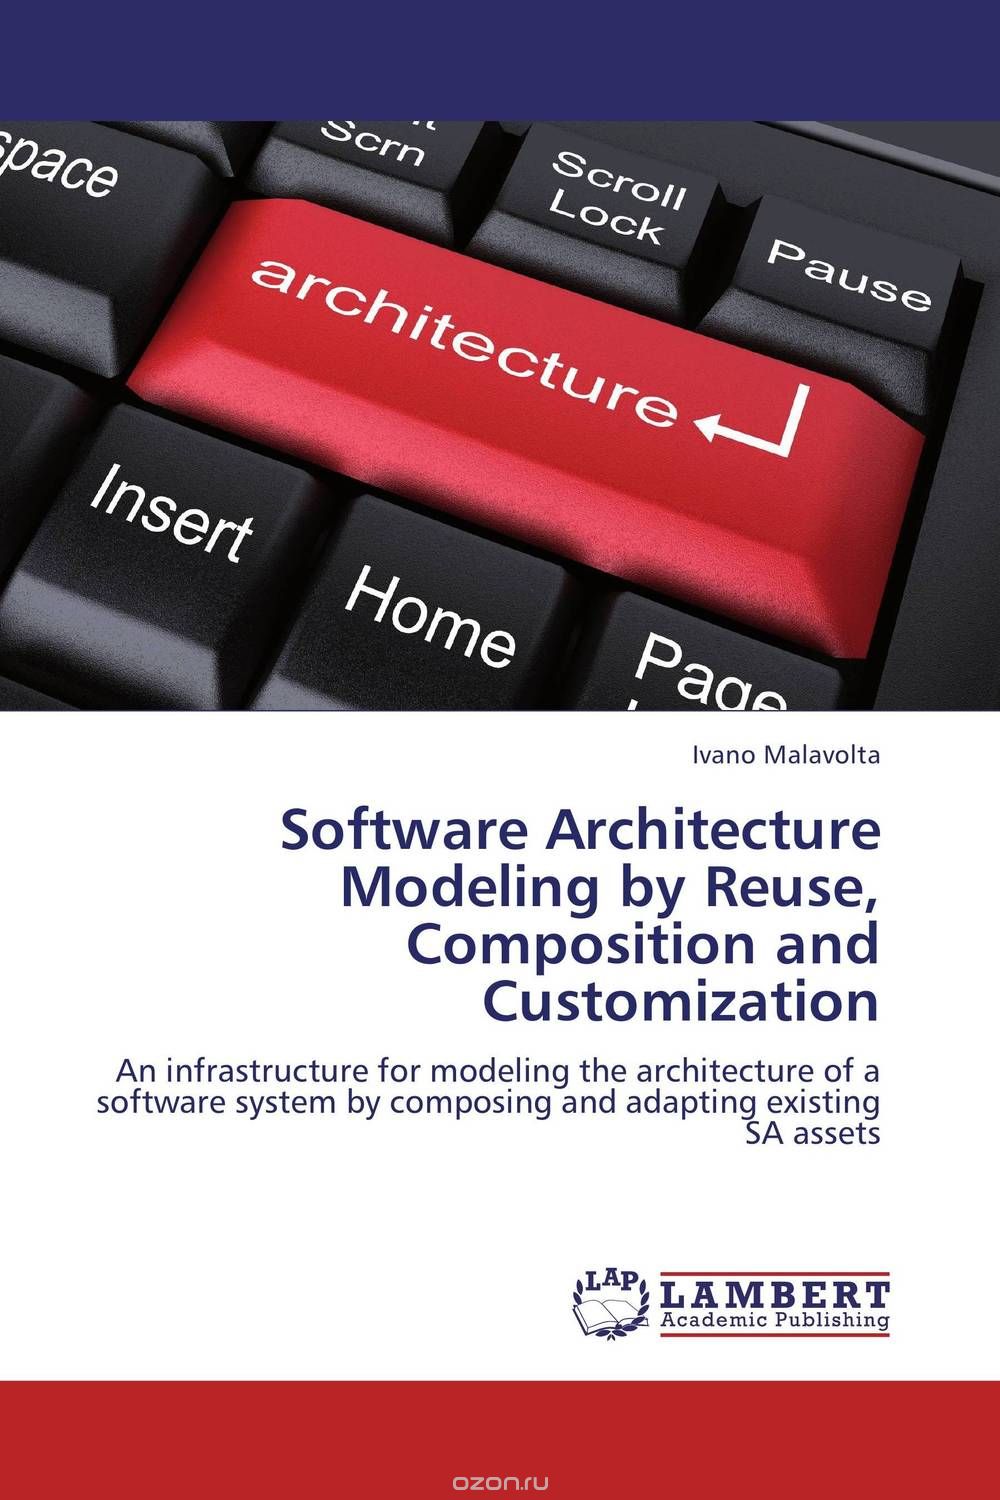 Software Architecture Modeling by Reuse, Composition and Customization